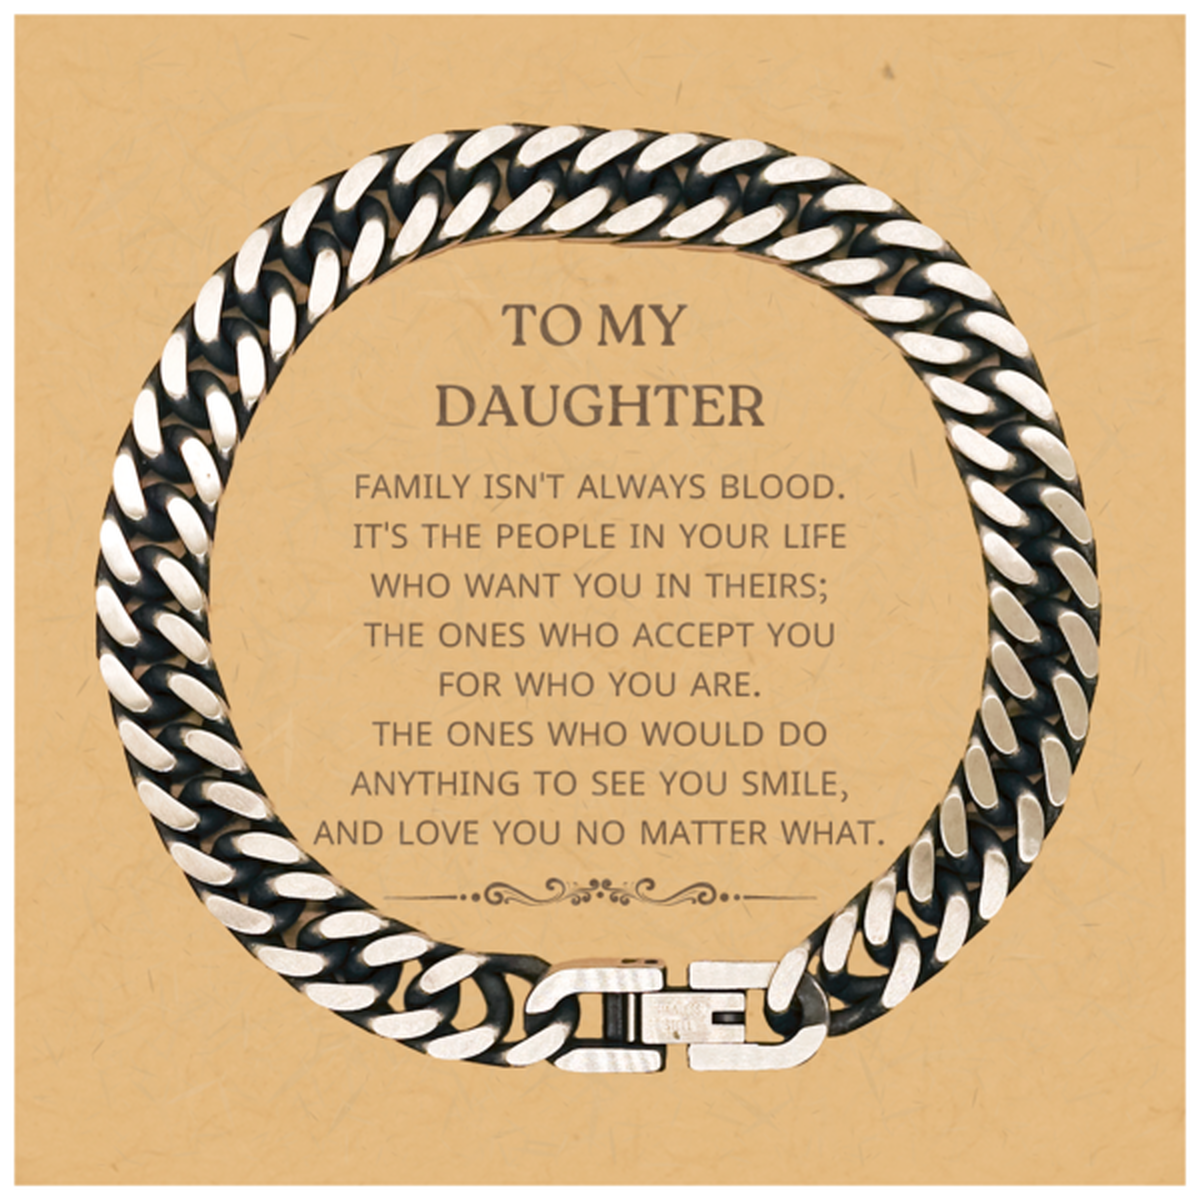 To My Daughter Gifts, Family isn't always blood, Daughter Cuban Link Chain Bracelet, Birthday Christmas Unique Present For Daughter